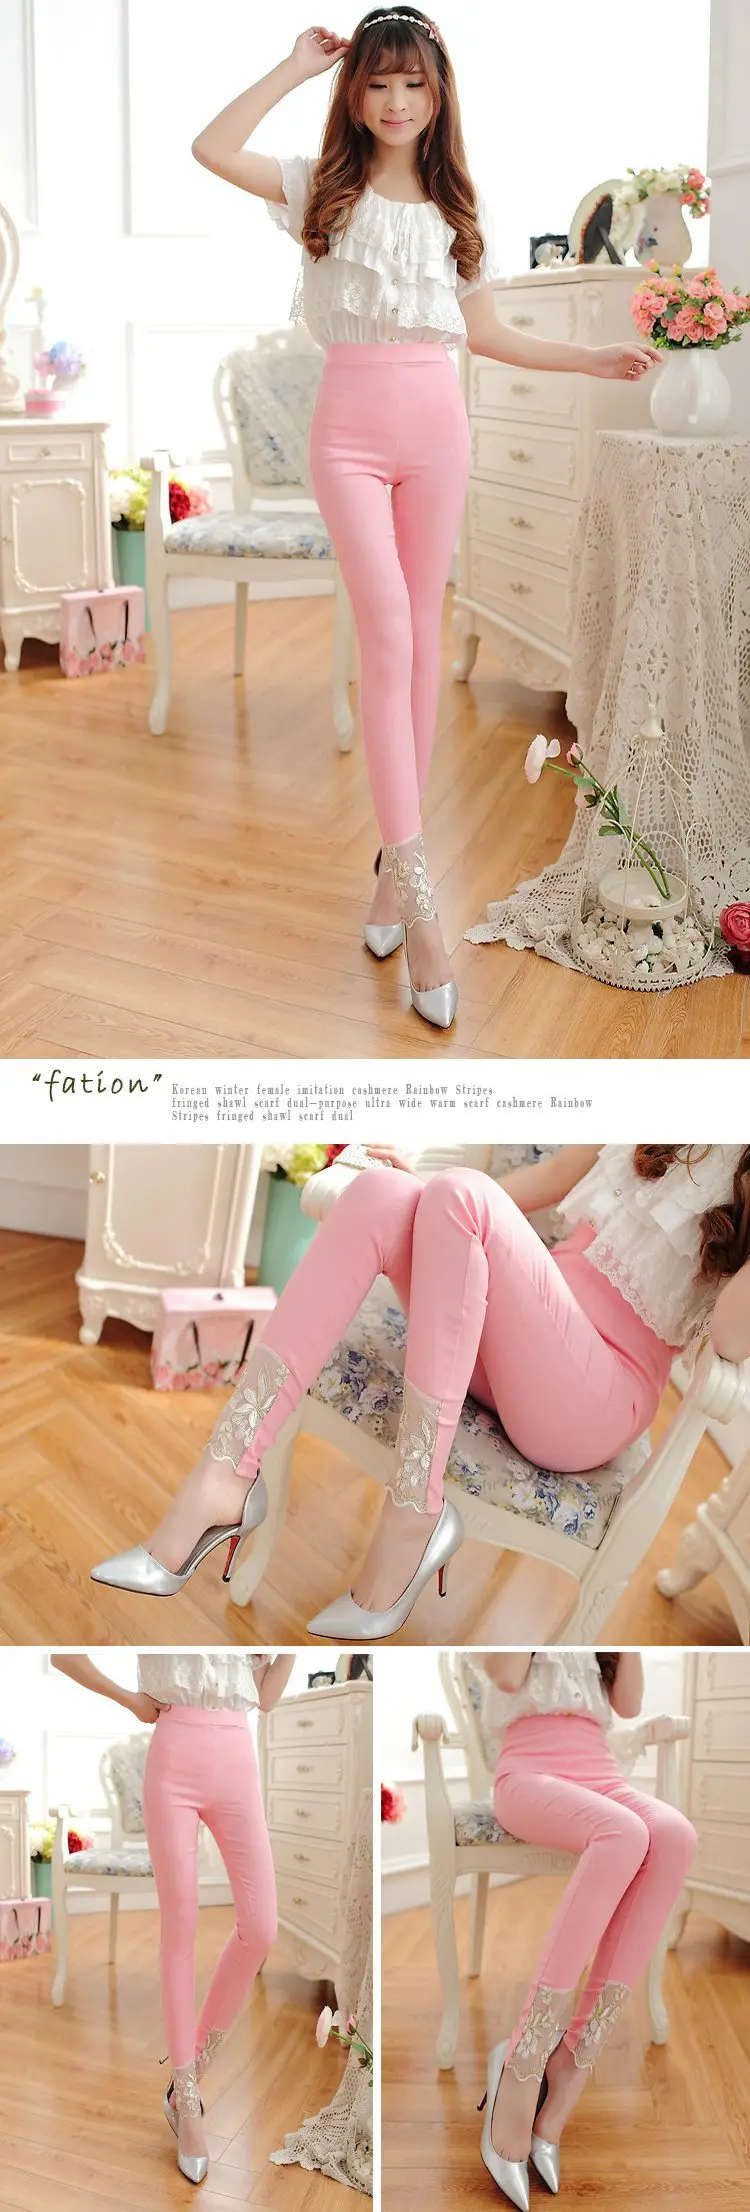 Lady Cotton Blended Lace Pants For Female Flower Embroidery Casual